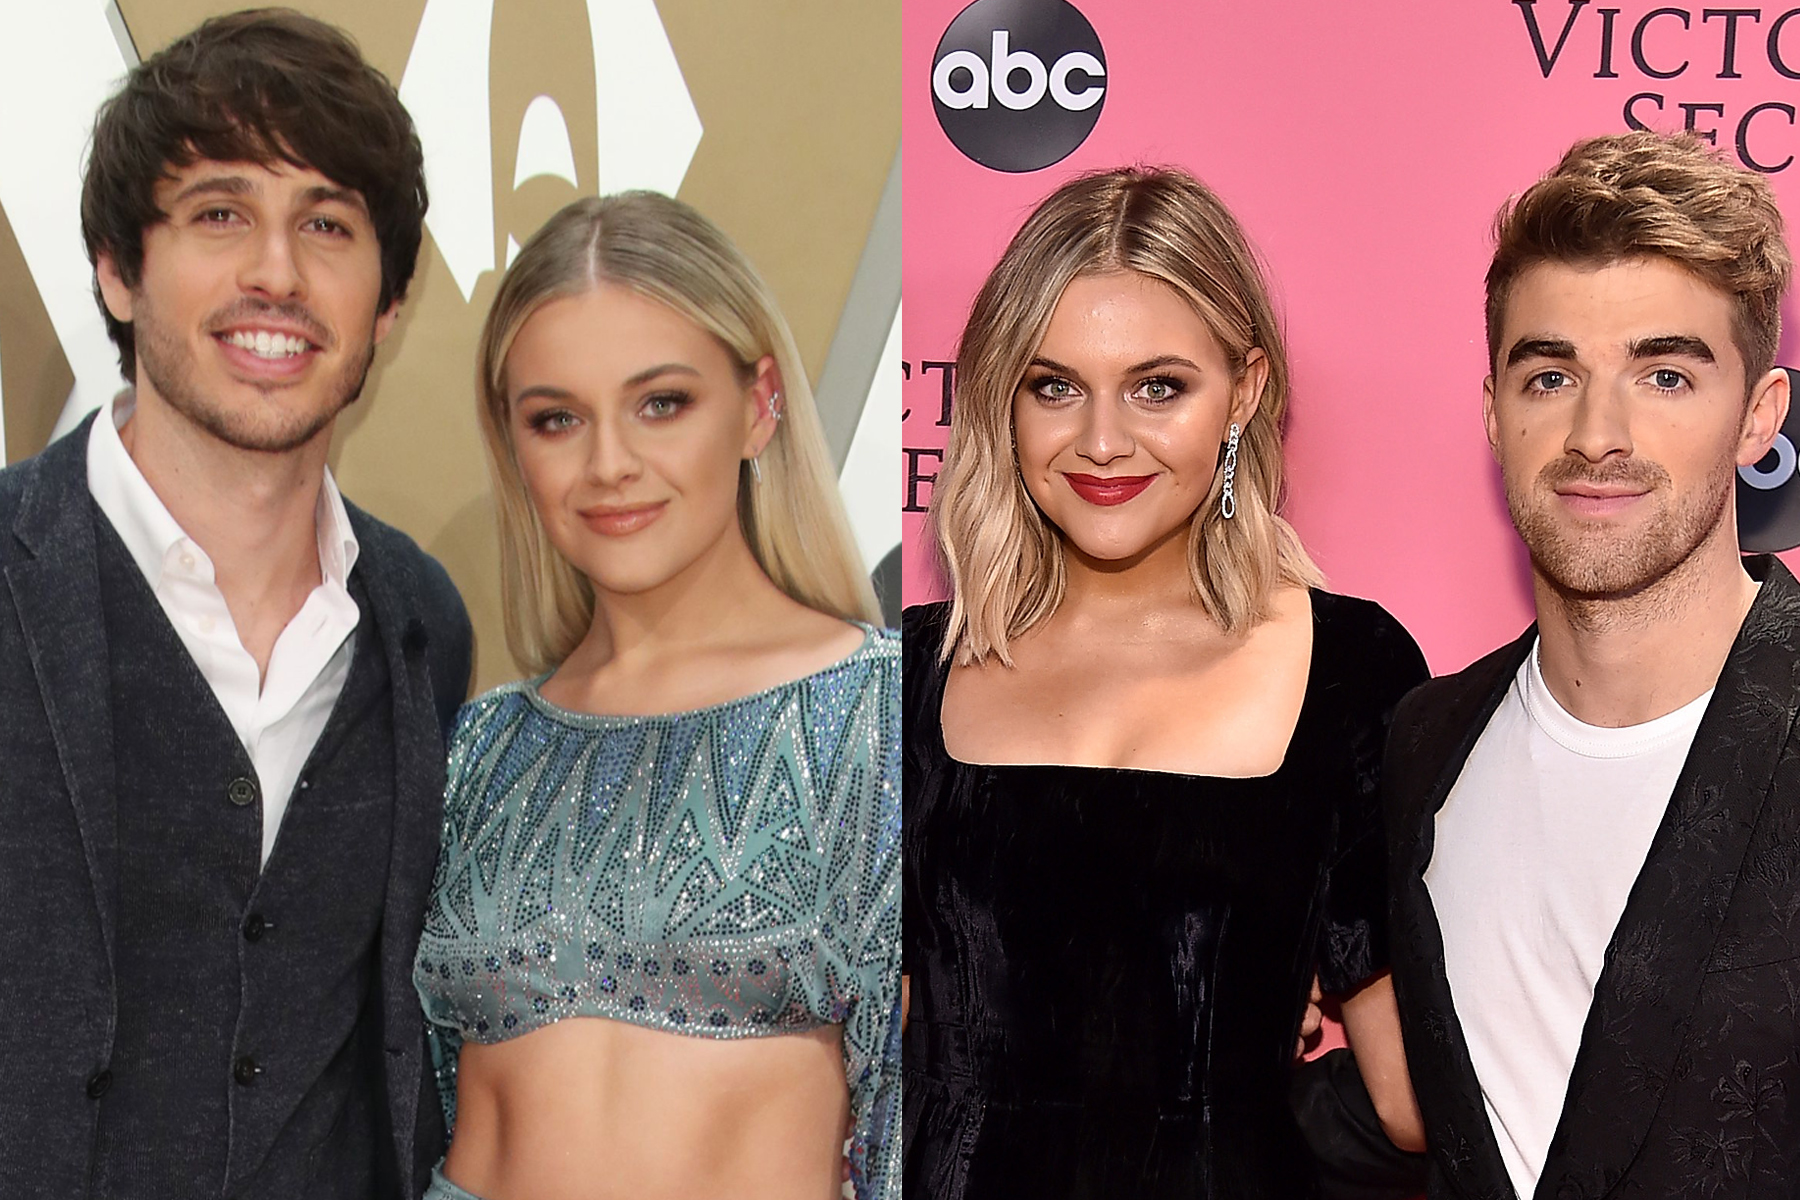 <p>When Kelsea Ballerini and Morgan Evans announced they were <a href="https://www.wonderwall.com/celebrity/couples/celebrity-love-news-for-late-august-2022-romance-report-addison-rae-mom-yung-gravy-leonardo-dicaprio-split-single-more-643783.gallery?photoId=1056199">divorcing</a> in the summer of 2022 after more than four years of marriage, things seemed amicable. But in early 2023, claims that she allegedly cheated made headlines. In February 2023, Kelsea and Morgan (left) gave conflicting accounts of the circumstances that led to their breakup, with Kelsea telling the "Call Her Daddy" podcast there was "such a sense of disconnection" in their marriage, they spent years in therapy, she often slept on the couch and that she and Morgan would go for ages without seeing each other — and when they finally did, "I felt like I was carrying that load …  I was just tired of showing up in that way all the time and not feeling like I was seen or matched," she said. Morgan hit back on Instagram, saying it was "really sad for me to see this person, who I spent so much of my life with, and loved with all my heart, saying things that aren't reality and that leave out what really happened."</p><p>In the wake of the he said-she said, <a href="https://pagesix.com/2023/02/22/kelsea-ballerini-cheated-on-morgan-evans-with-drew-taggart/">Page Six</a> reported that <a href="https://www.wonderwall.com/celebrity/josh-groban-makes-things-official-with-new-leading-lady-an-english-theater-actress-plus-more-news-707277.gallery">Kelsea allegedly cheated on Morgan</a> with The Chainsmokers member Drew Taggart (right) — who was single at the time of the alleged hookup. Kelsea and Drew reportedly got intimate during Lollapalooza in the summer of 2019 after the country-pop singer collaborated with the EDM duo on the 2018 track "This Feeling." In 2021, Kelsea reportedly told Morgan that she'd been unfaithful, leaving him "blindsided."</p>